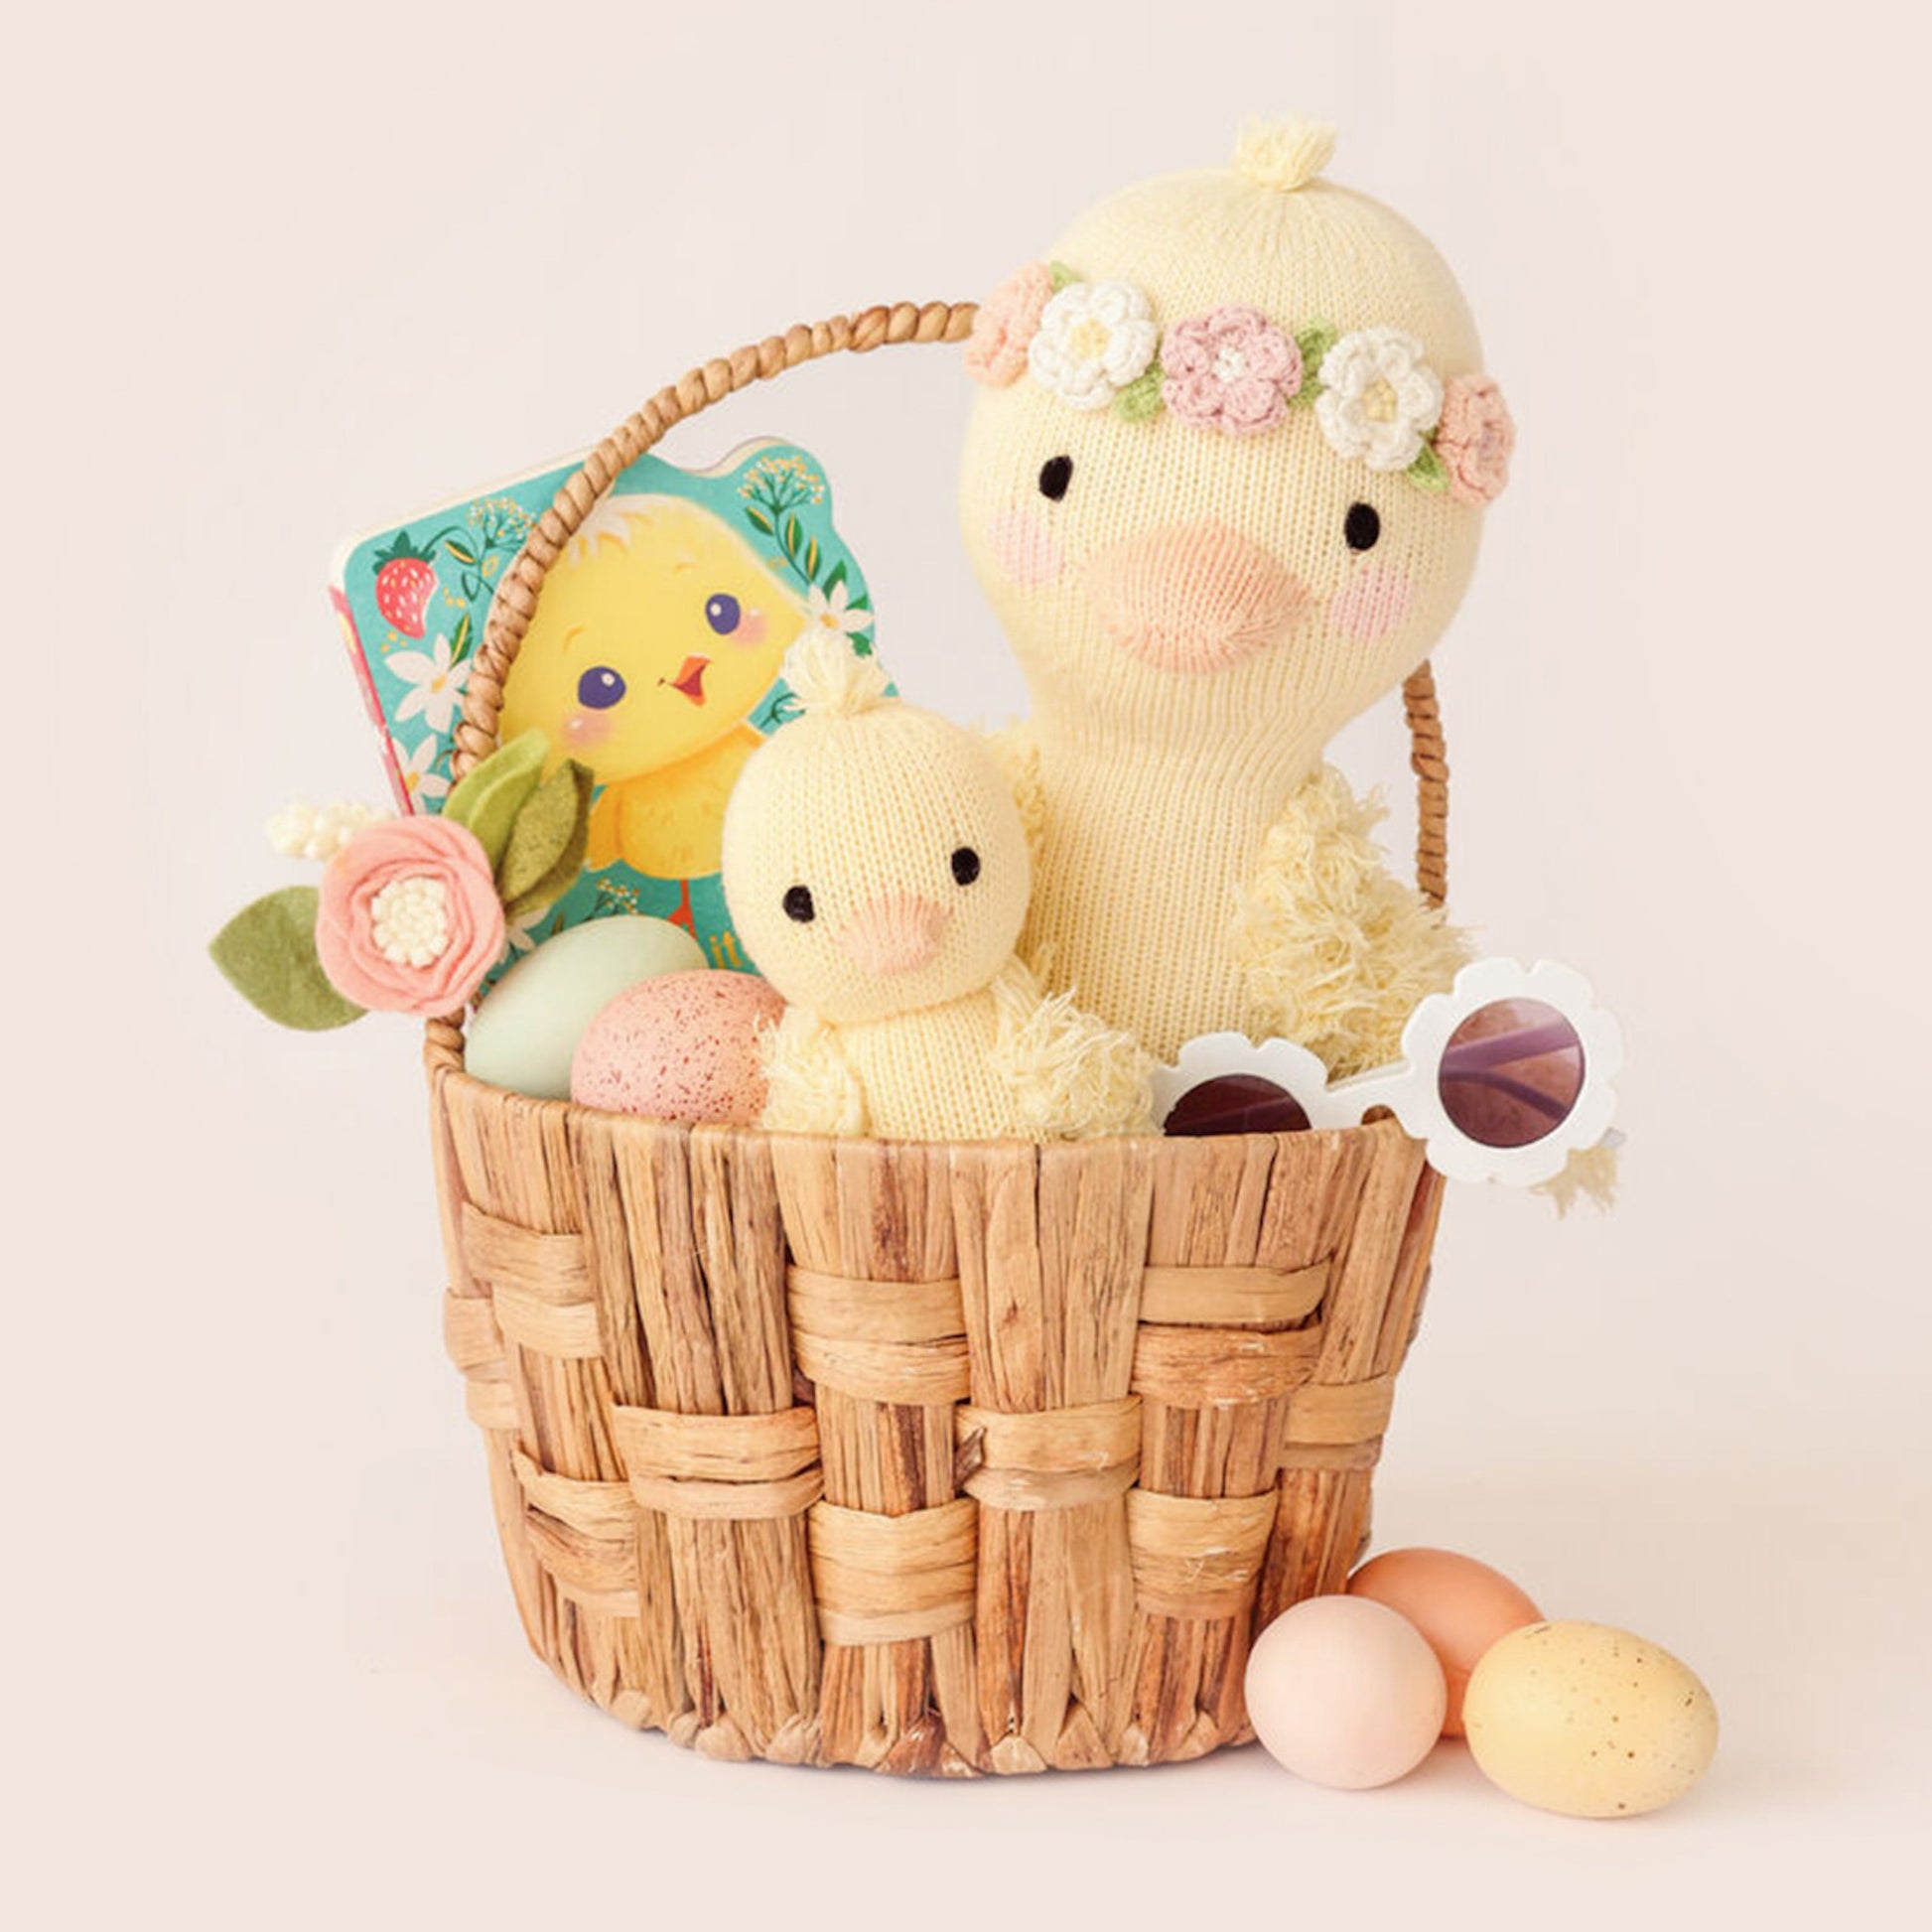 A Flora the duckling stuffed doll and a baby duckling stuffed animal in a basket, along with pastel eggs, a children's book and a pair of flower-shaped sunglasses.